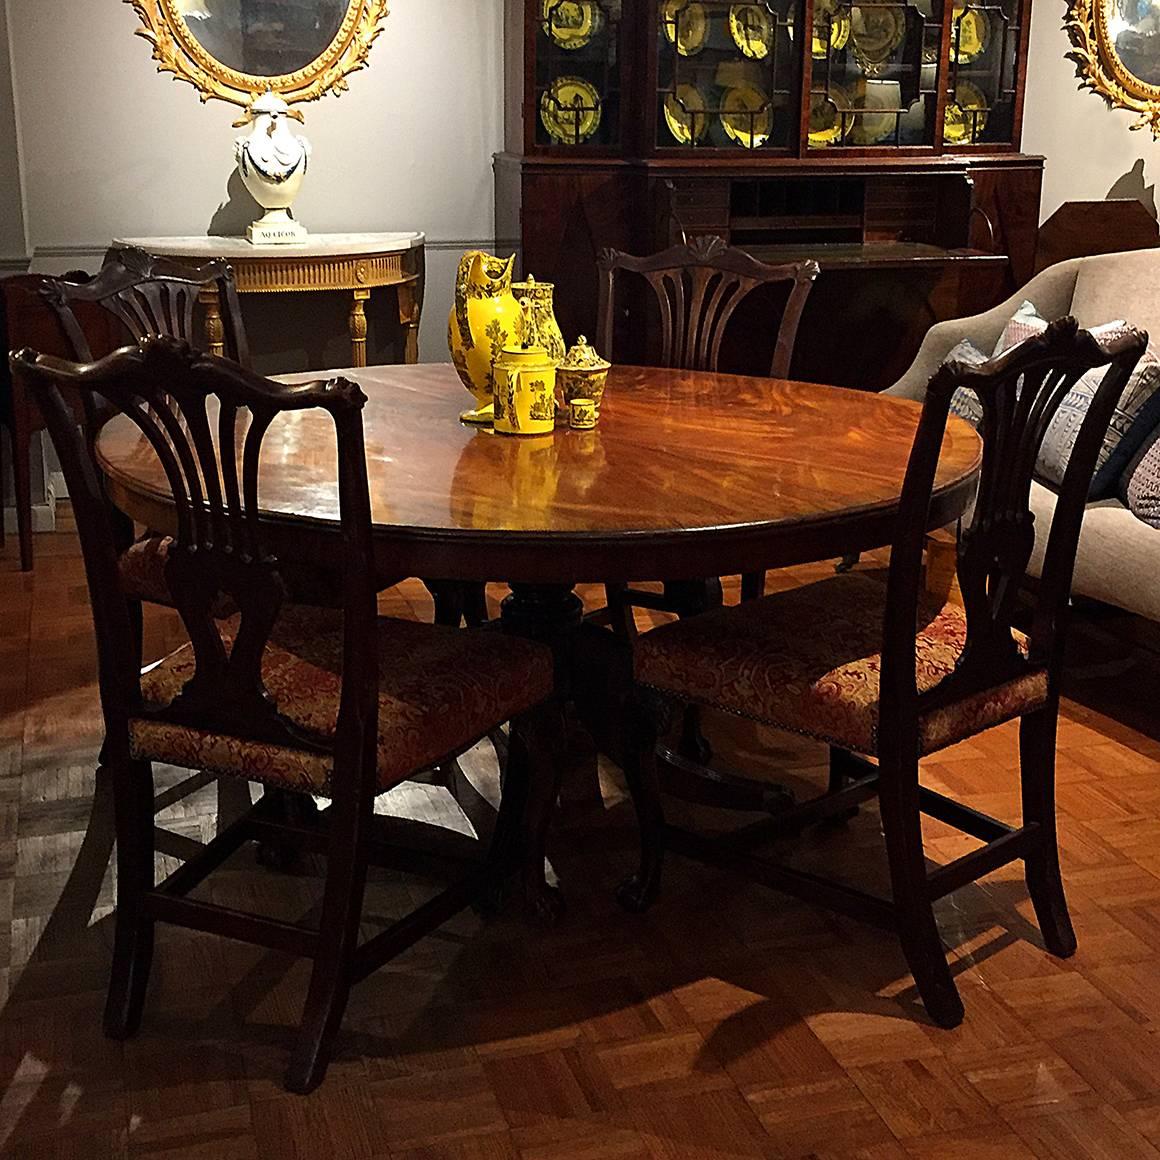 Circular Regency Mahogany Pedestal Dining Table In Excellent Condition For Sale In New York, NY